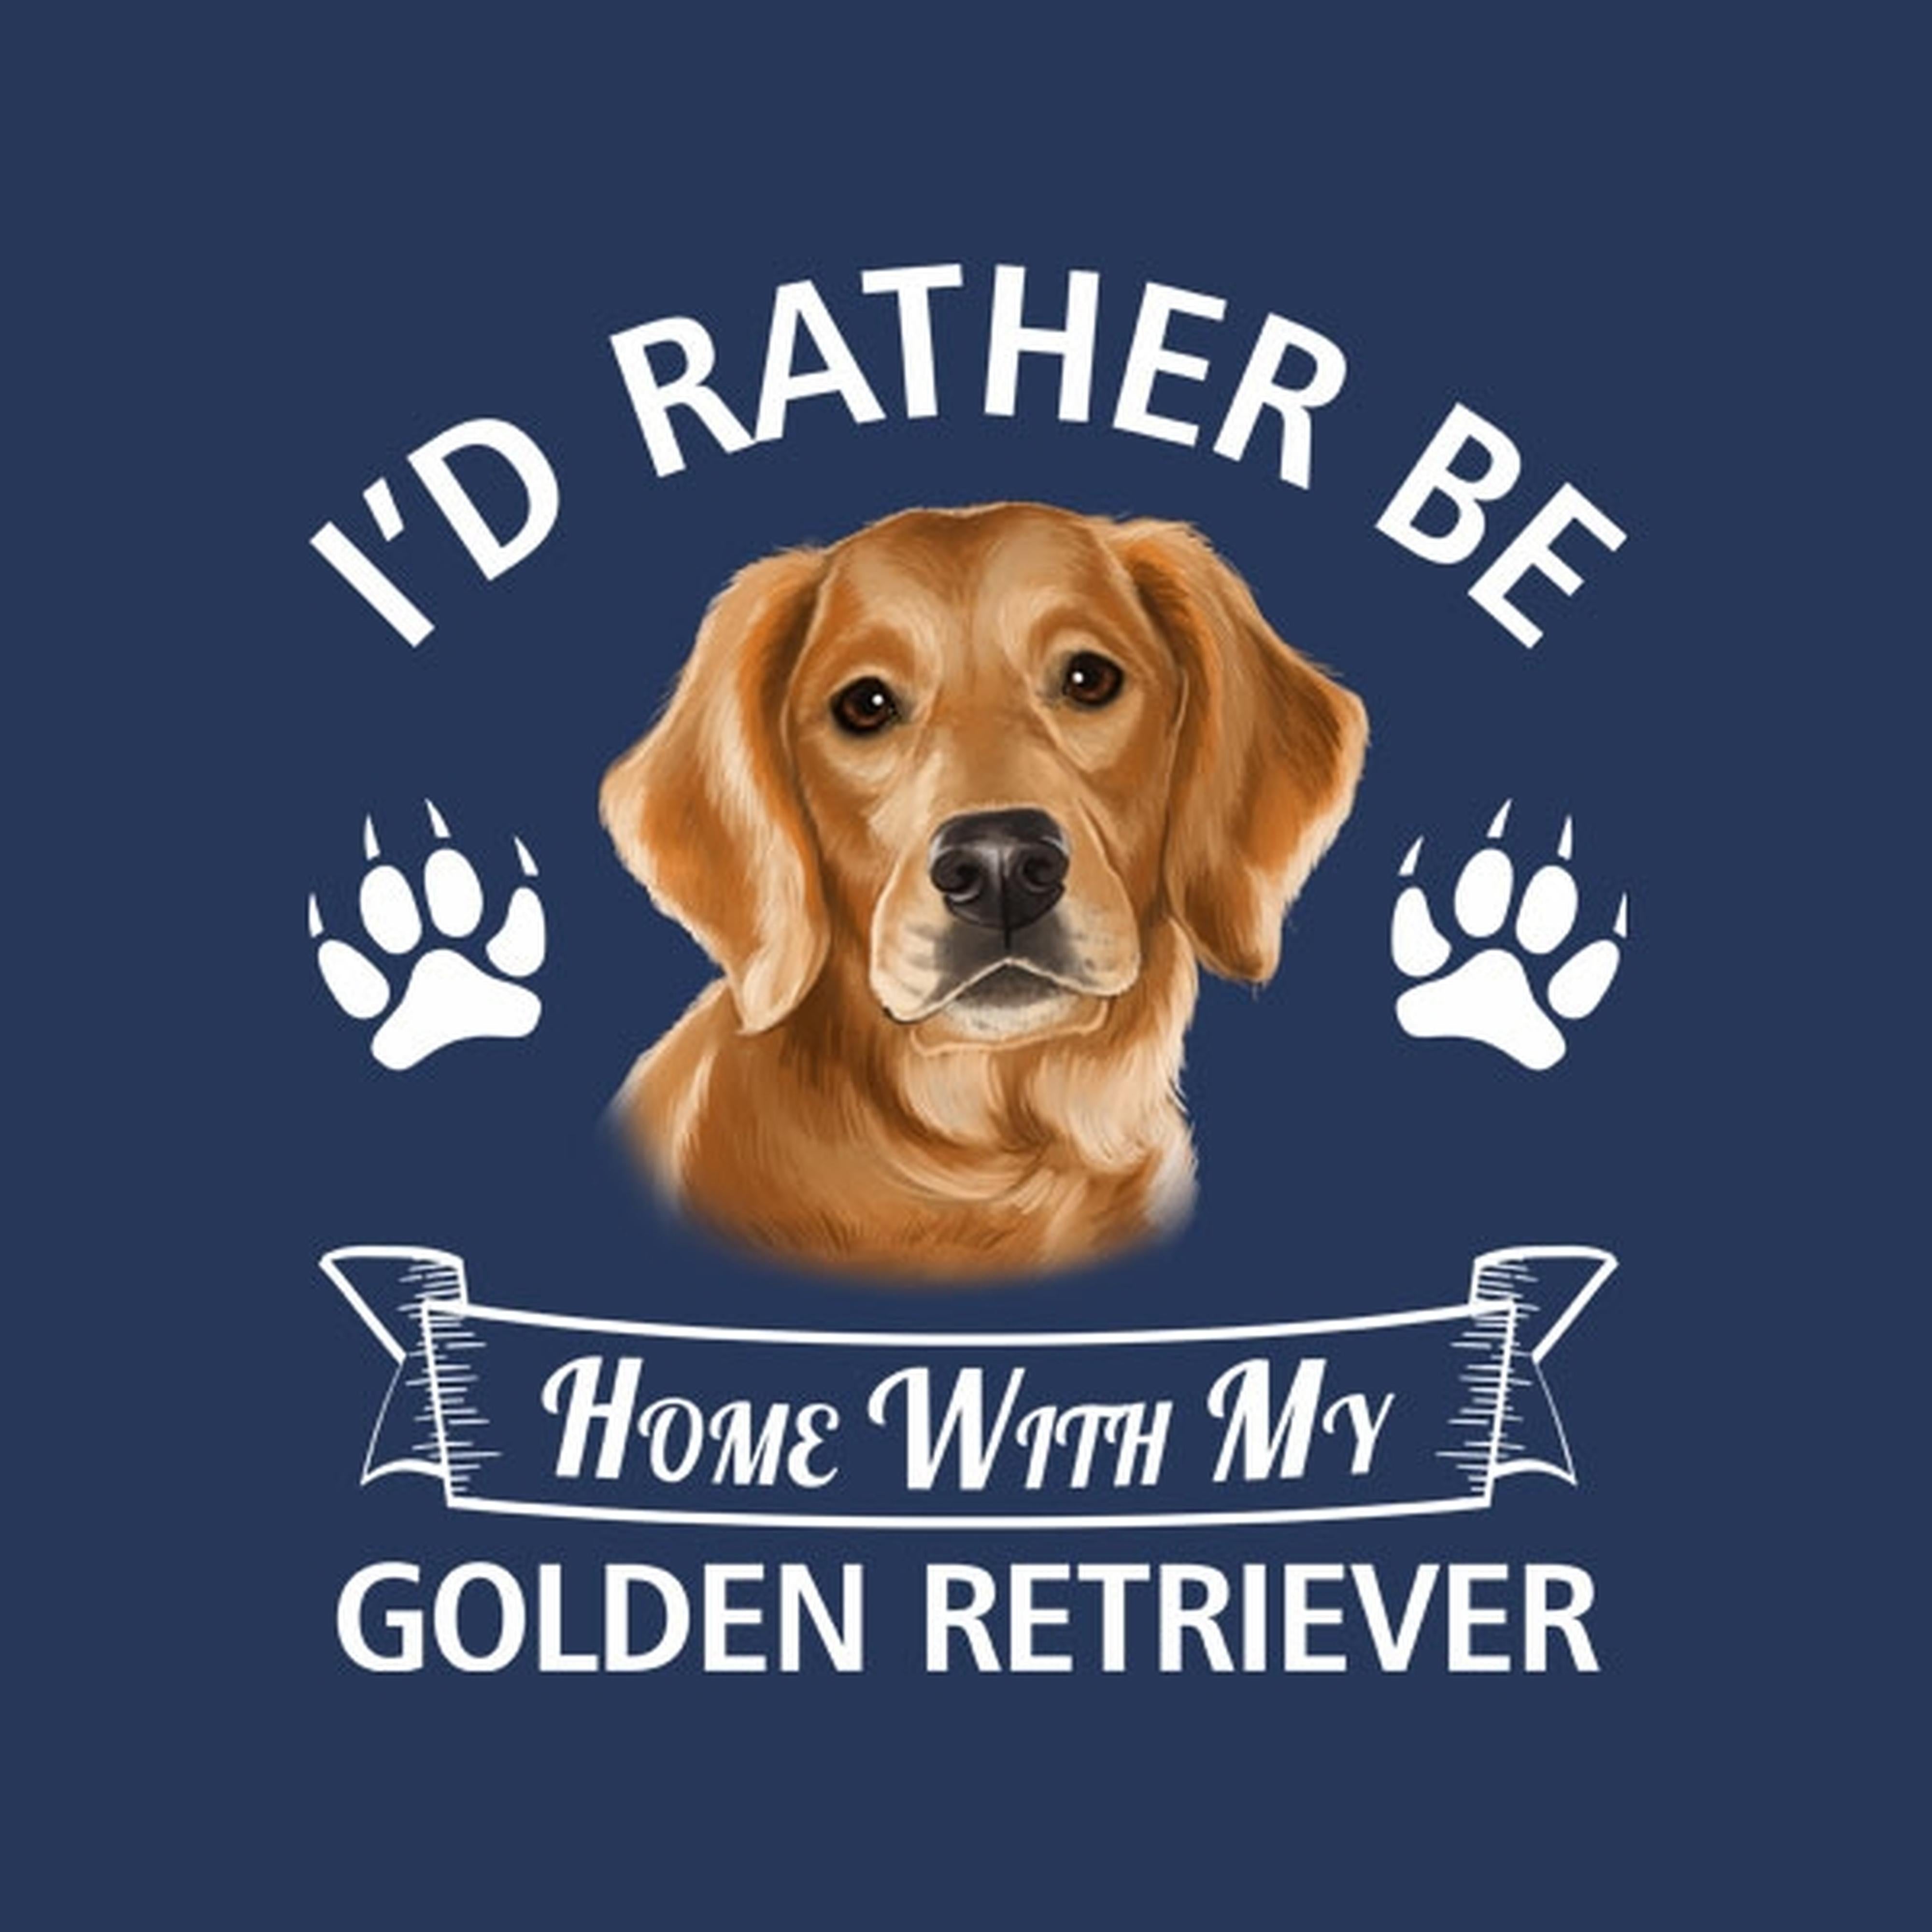 I'd rather stay home with my Golden Retriever - T-shirt